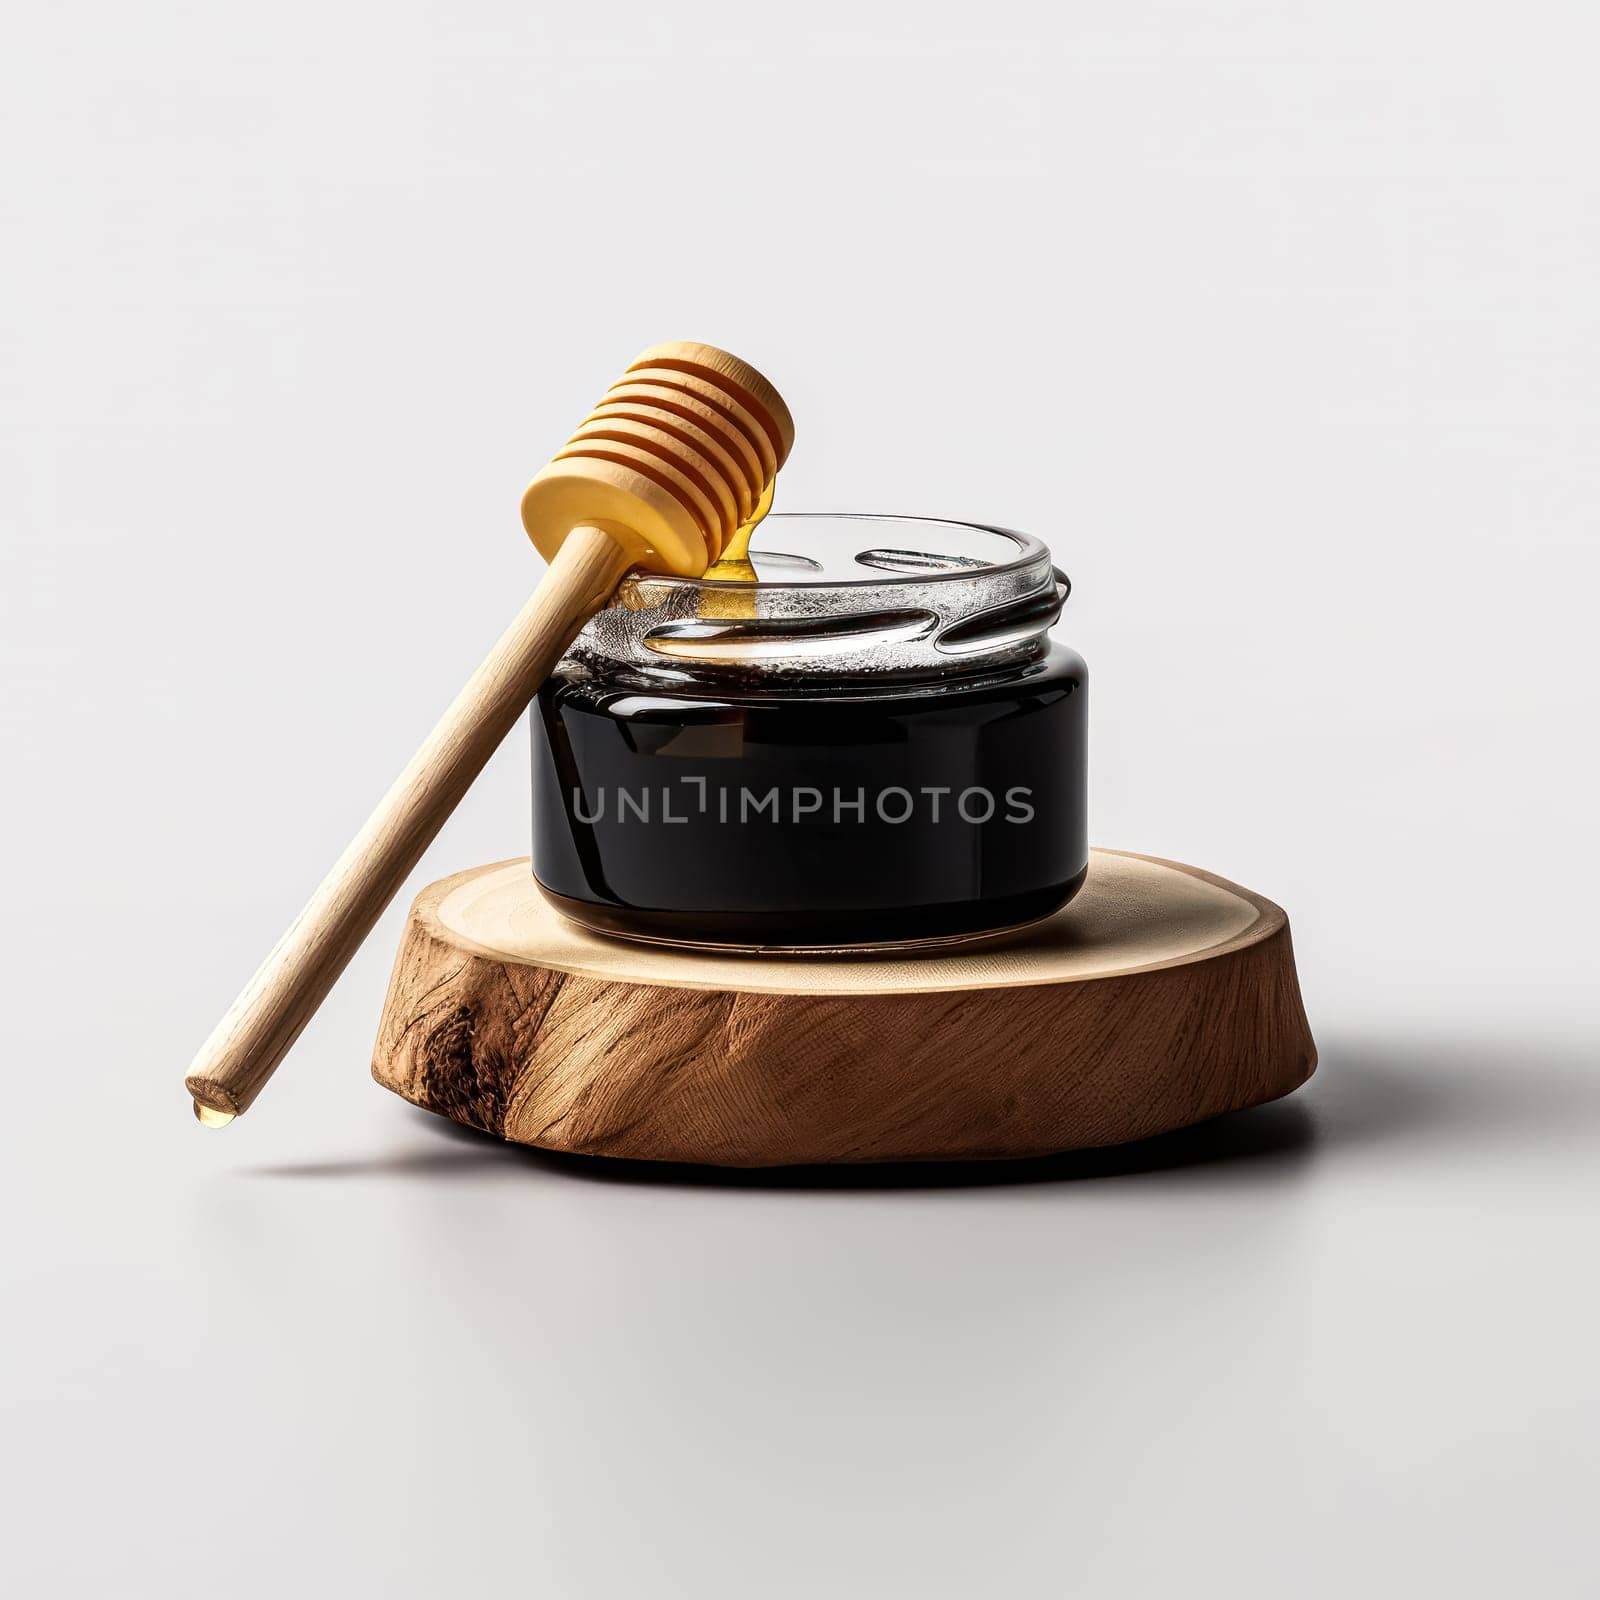 A wooden spoon is next to a jar of honey. The spoon is made of wood and has a curved handle. The jar of honey is in a glass container and is sitting on a white background